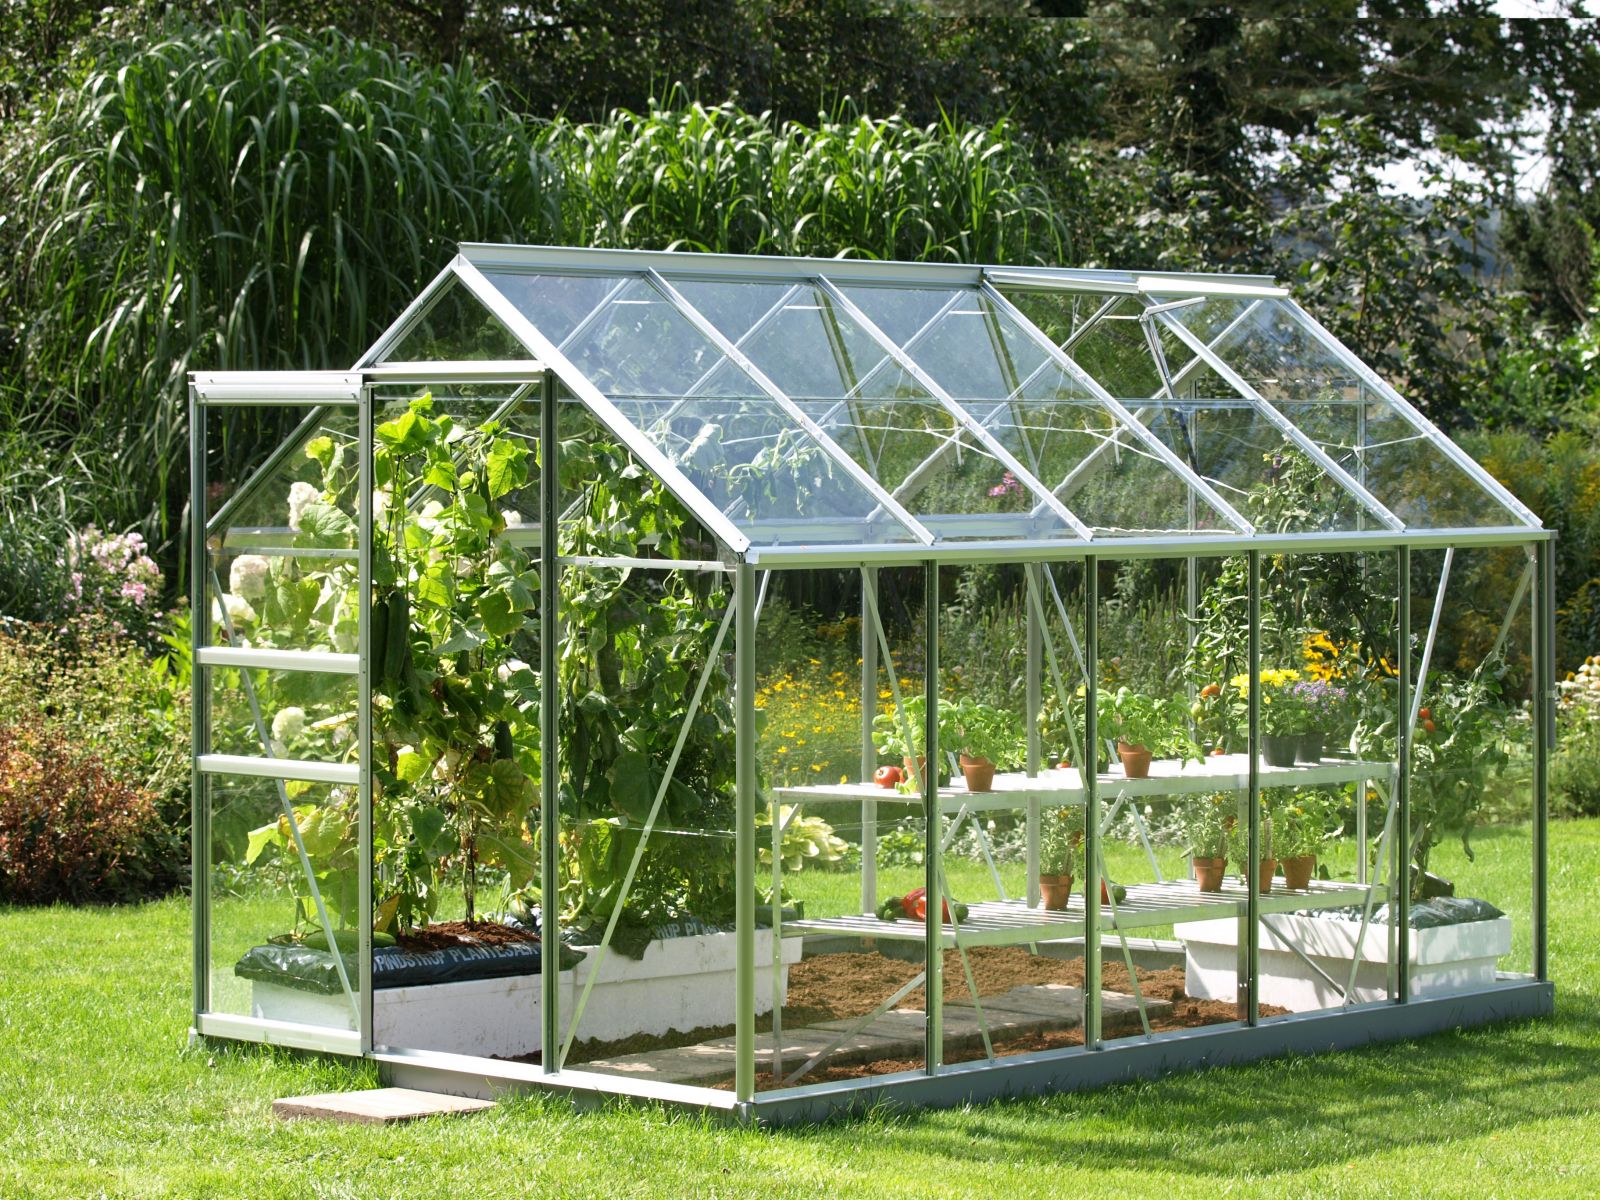 10 tips for choosing a greenhouse to give